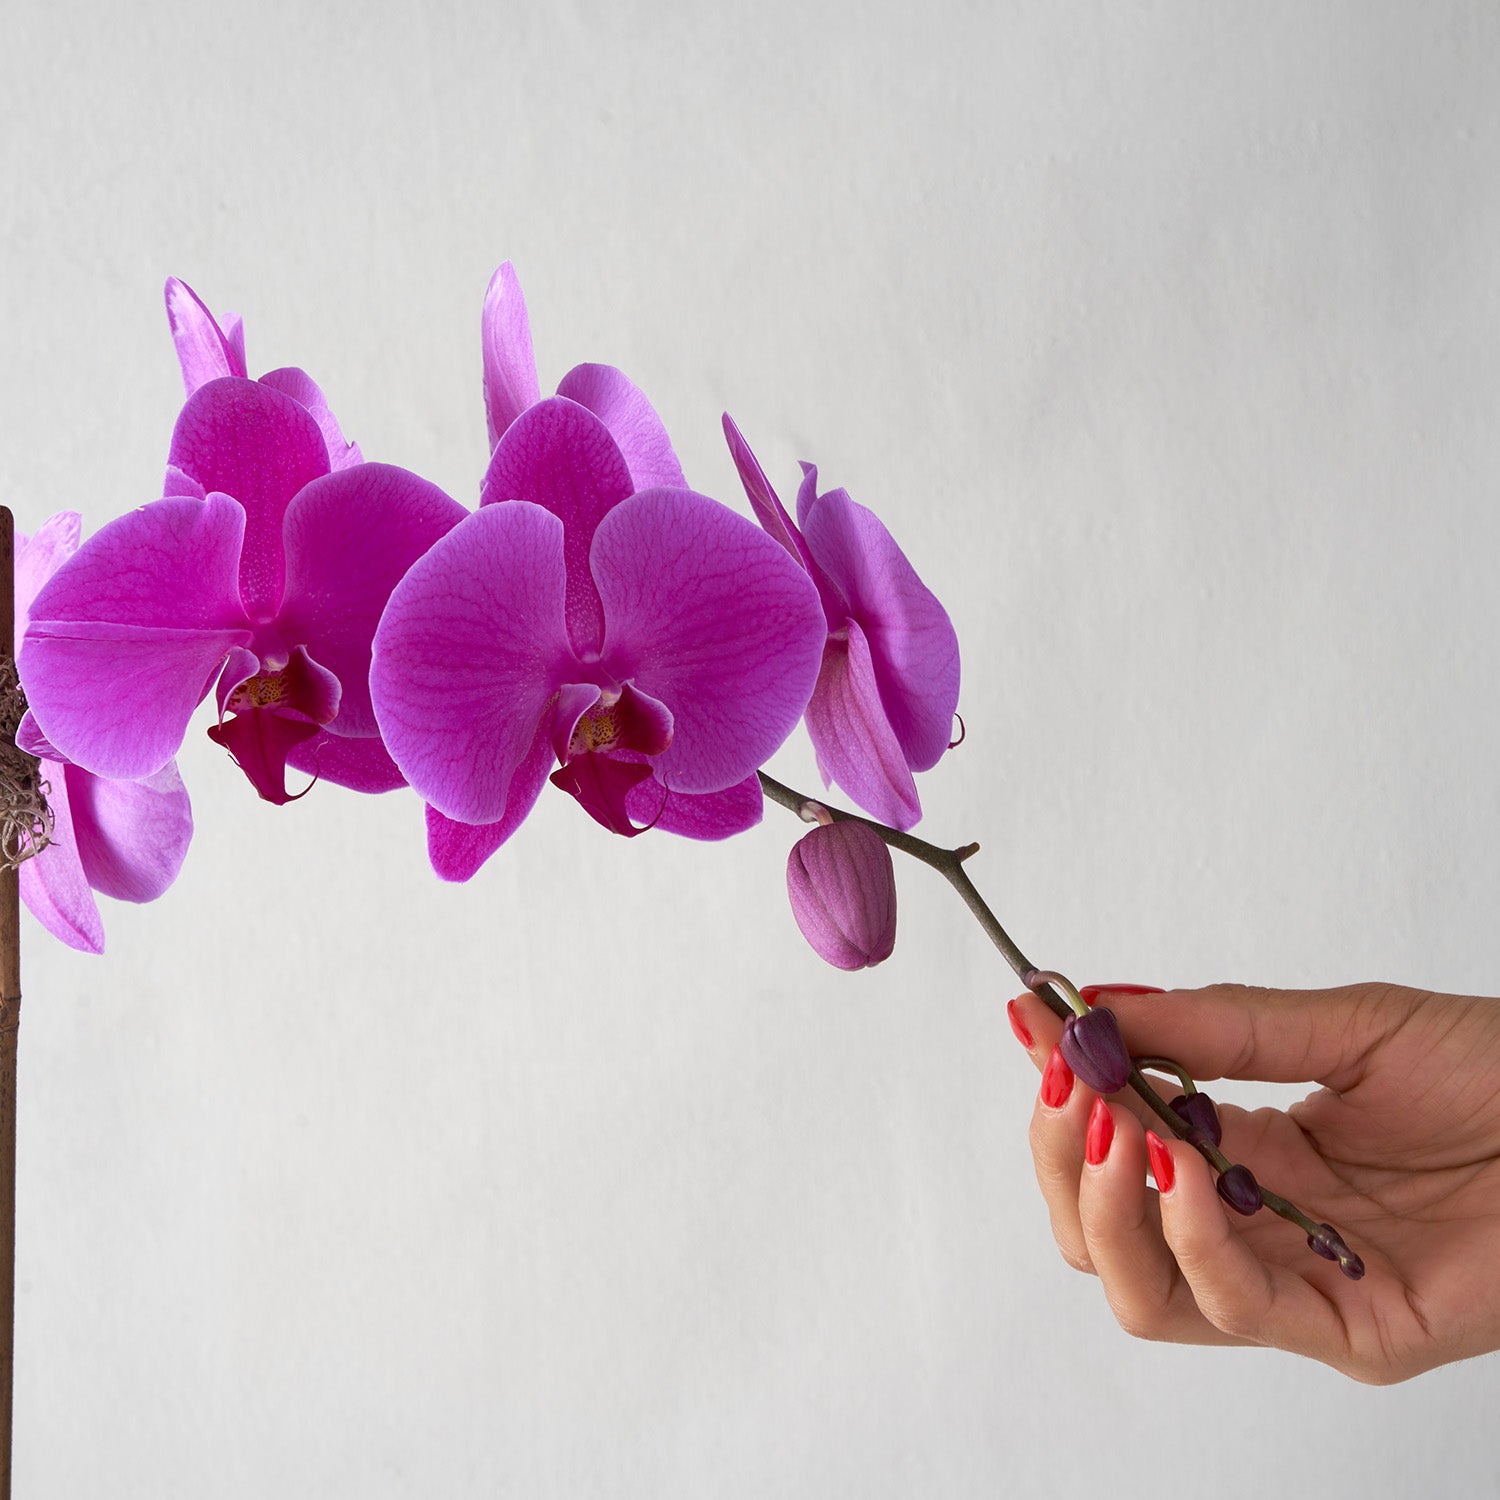 Hand with red nail polish touching uchsia pink phalaenopsis orchid stem on white background.